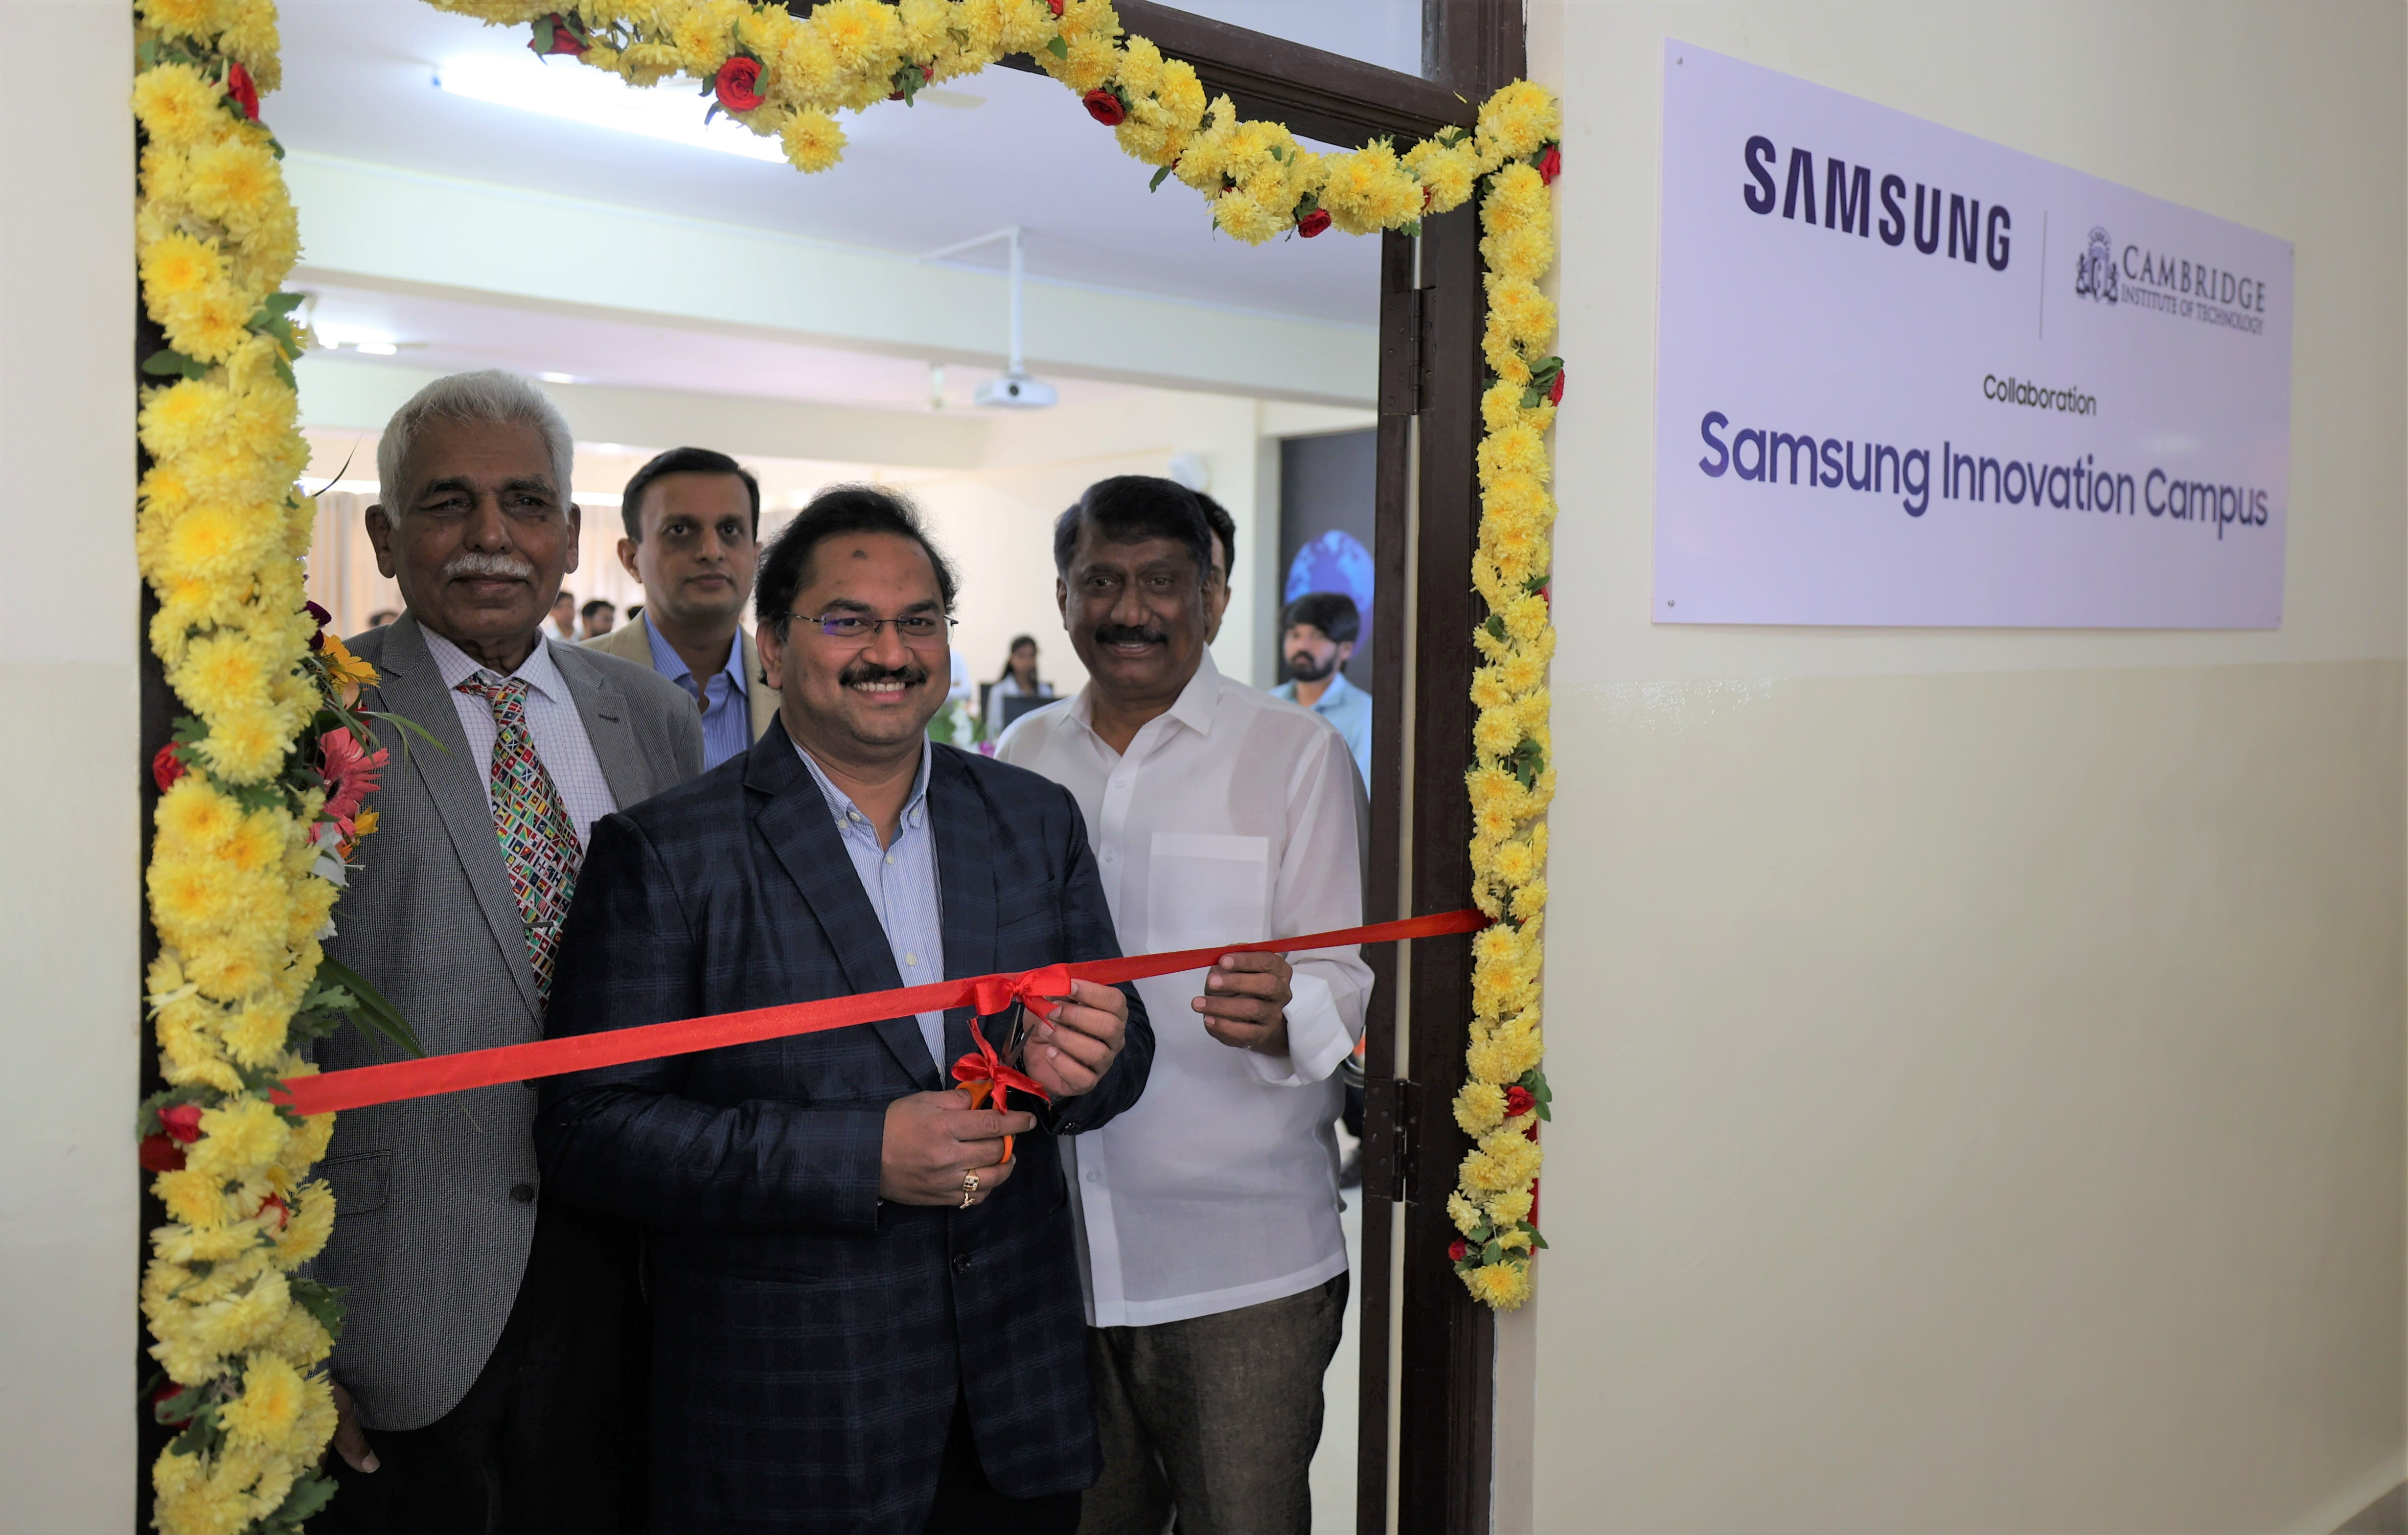 Samsung R&D Institute Launches ‘Samsung Innovation Campus’ Program at CIT, Bengaluru to Upskill Youth on AI, IoT, Big Data, Coding & Programming